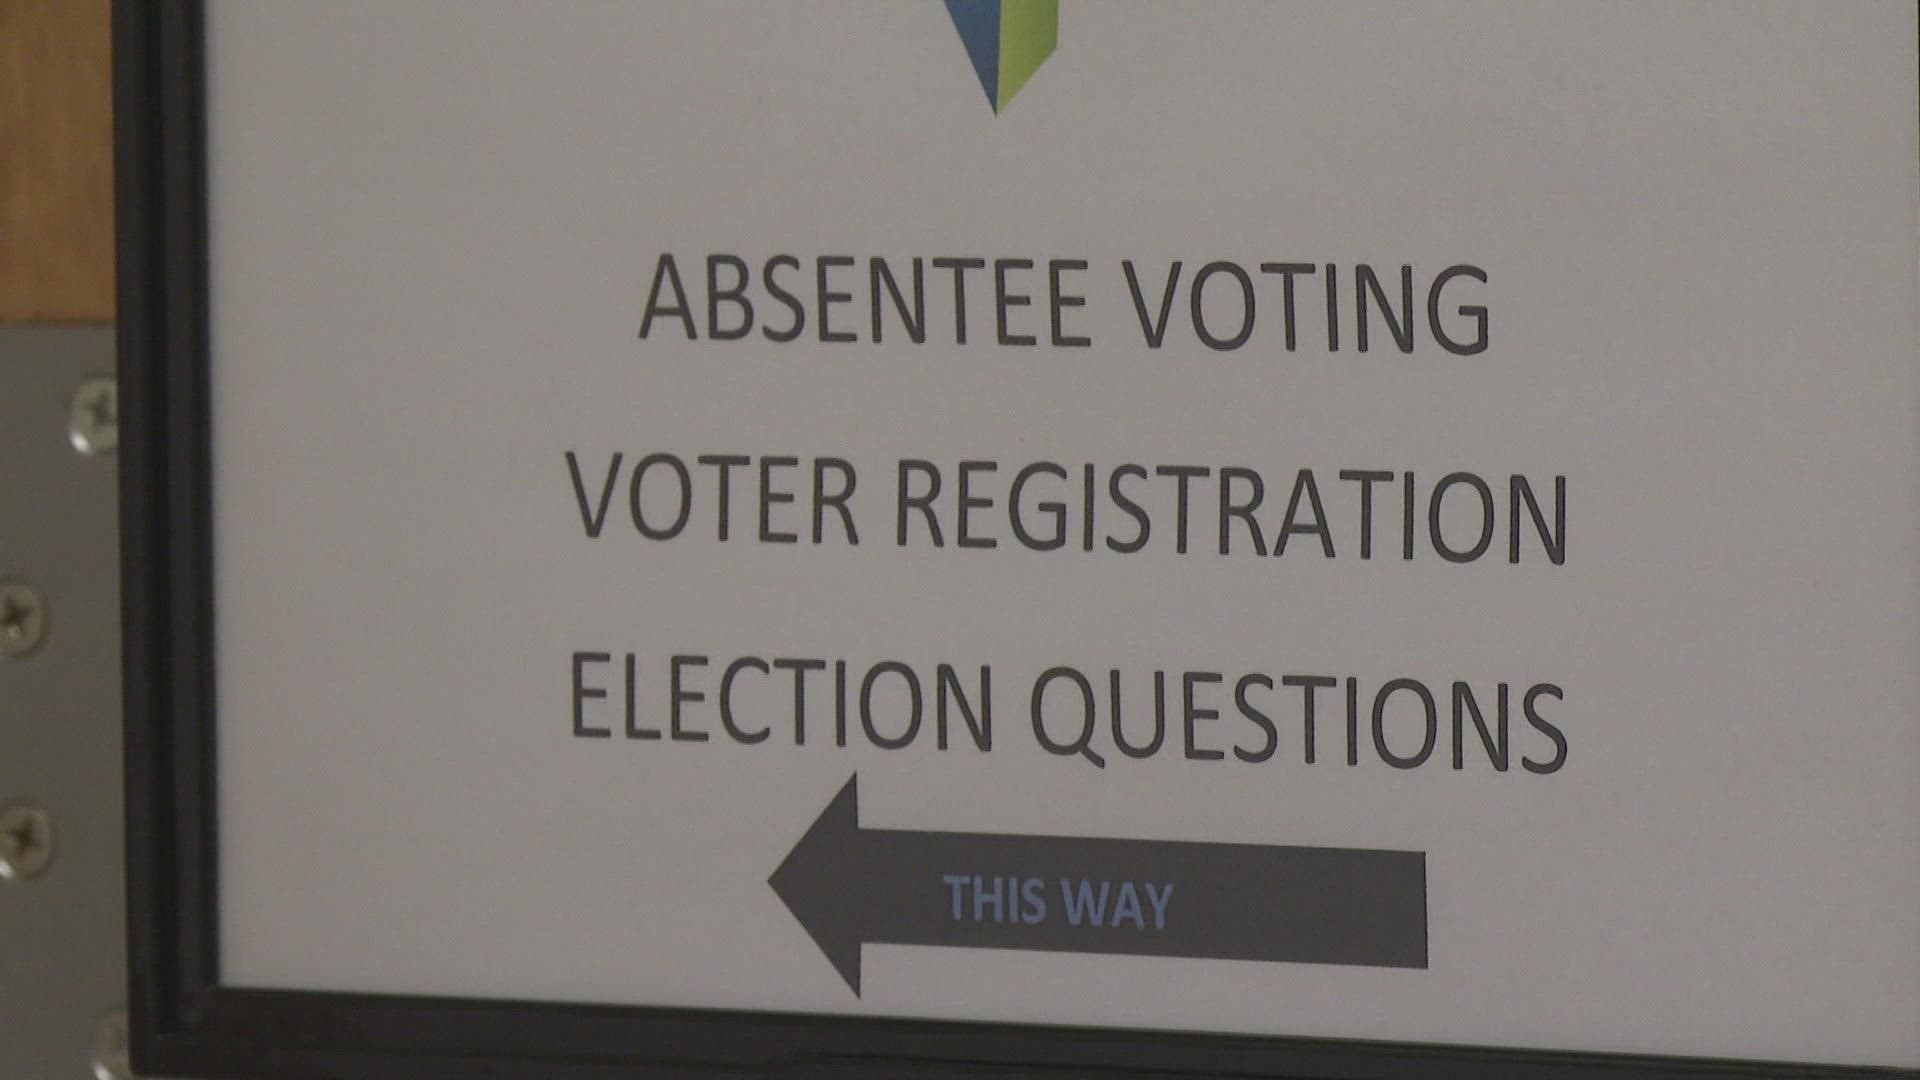 Thousands of Mainers asked for absentee ballots this year. How does each town keep track of making sure your vote is counted?